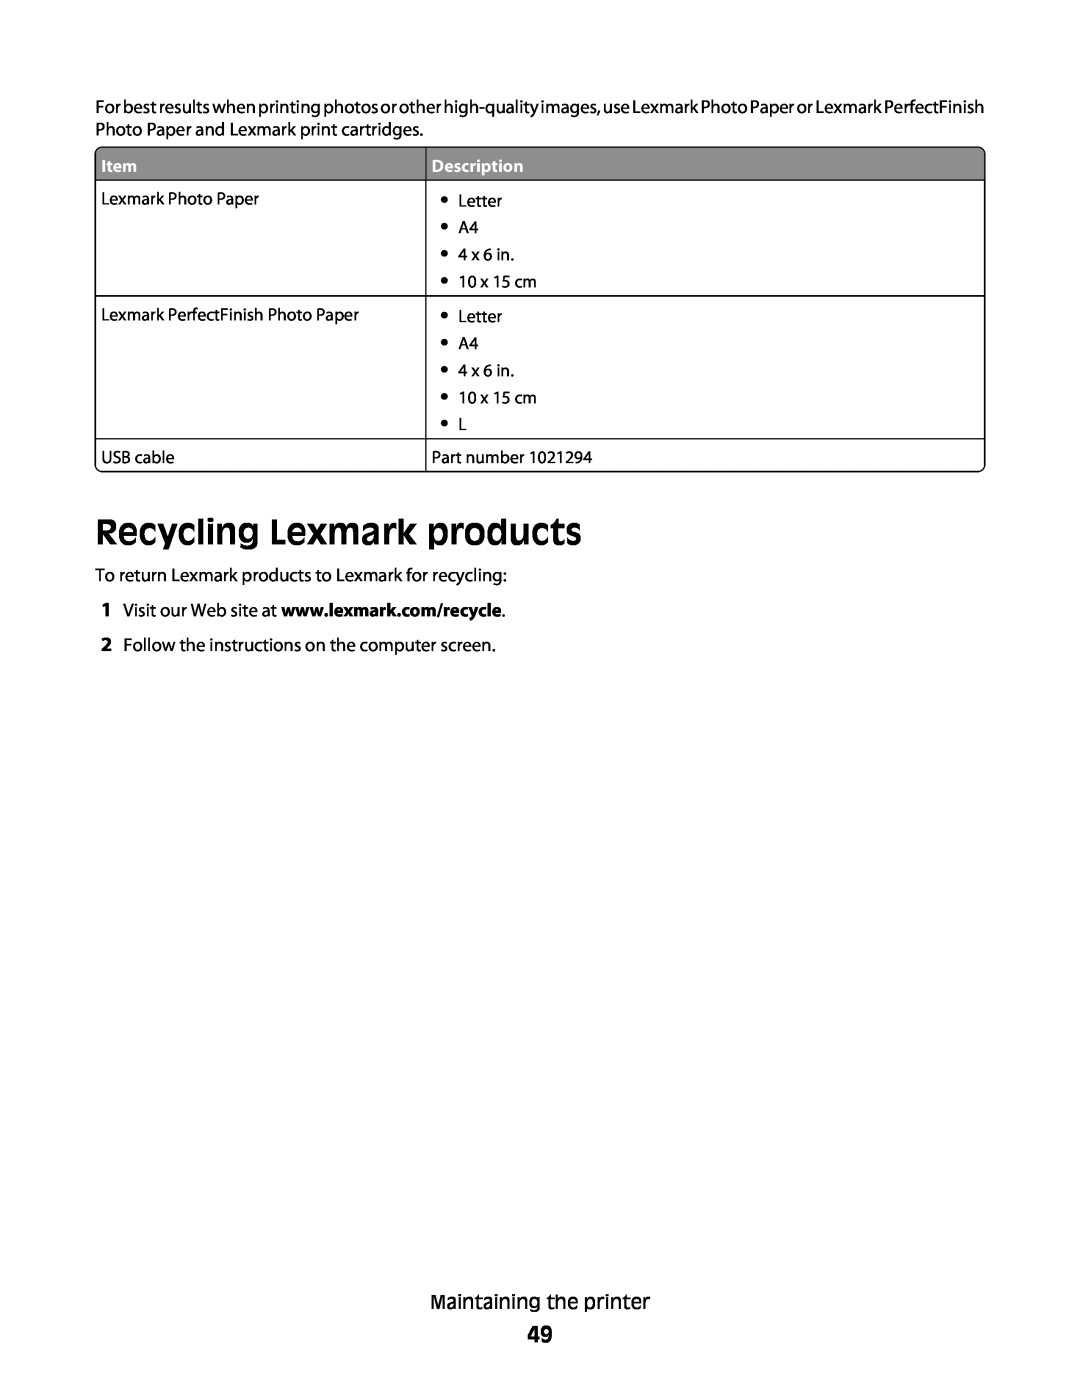 Lexmark 4445 Recycling Lexmark products, Lexmark Photo Paper Lexmark PerfectFinish Photo Paper USB cable, Part number 